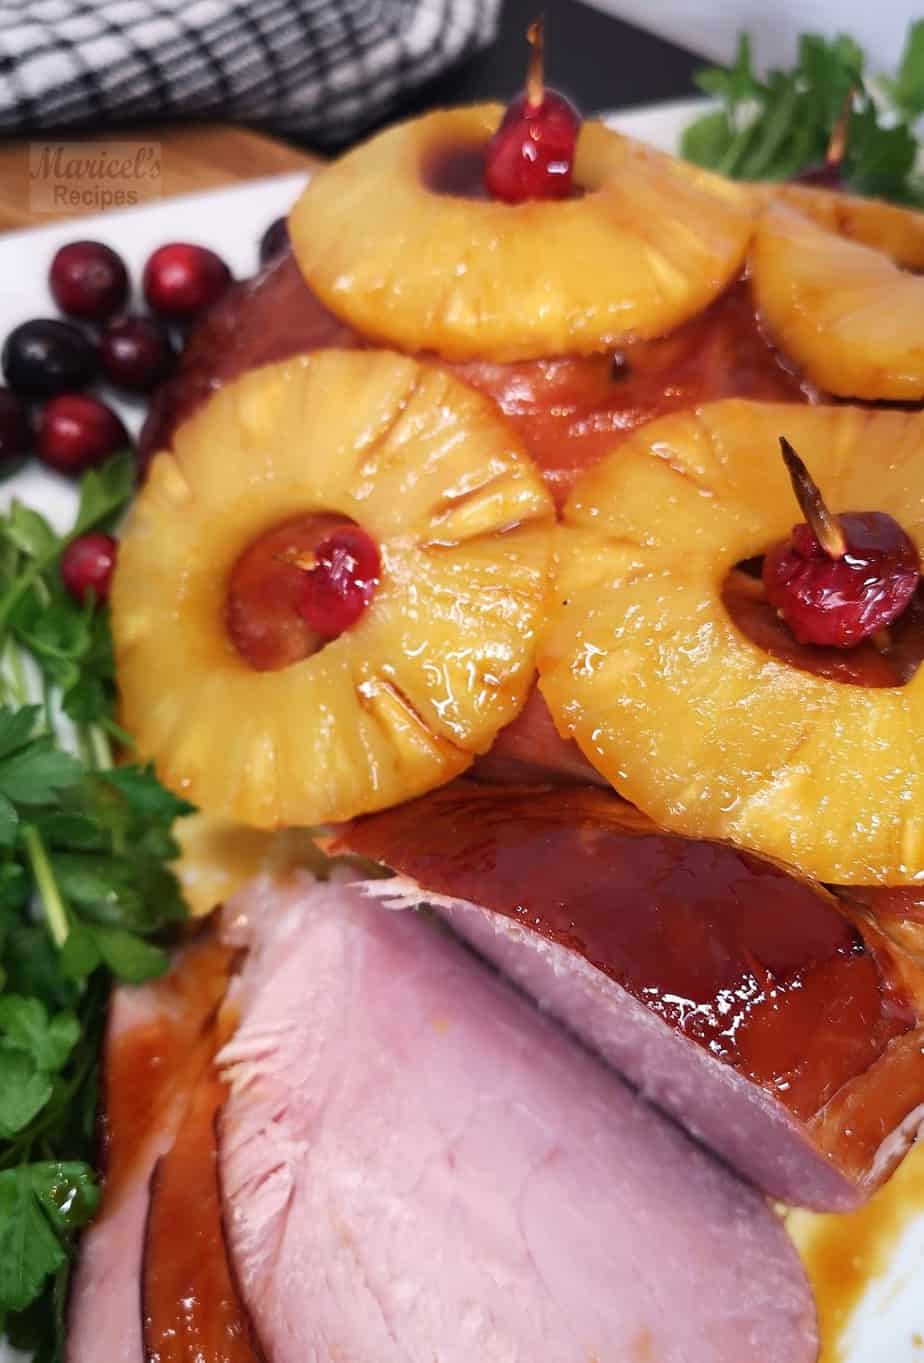 Pineapple Maple Glazed Ham - Maricels Recipes Home Cooking